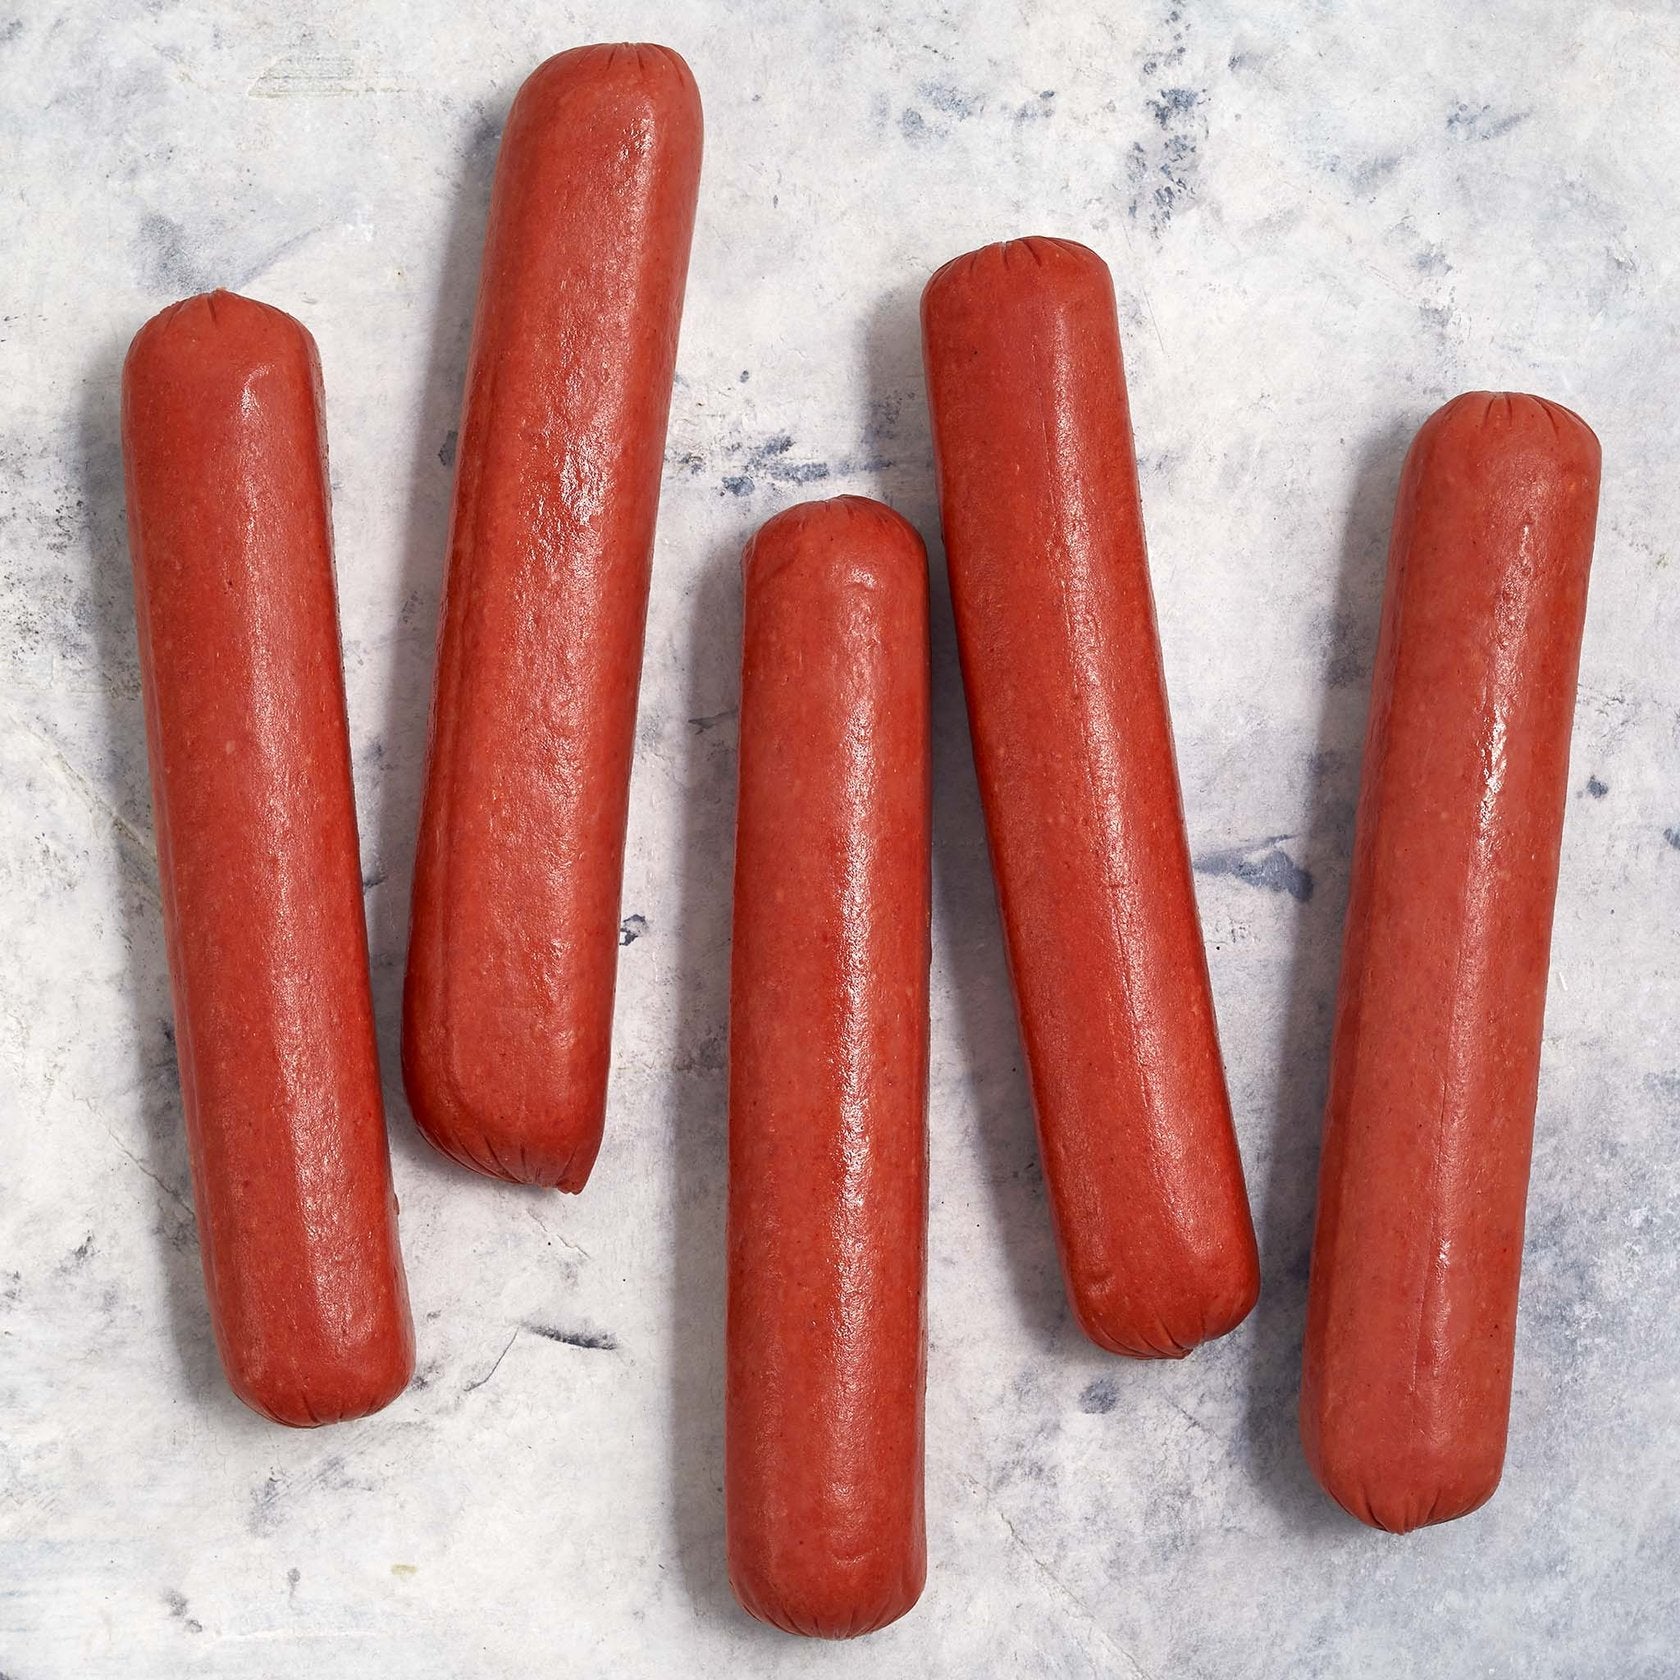 FULLY COOKED BEEF JUMBO HOT DOGS